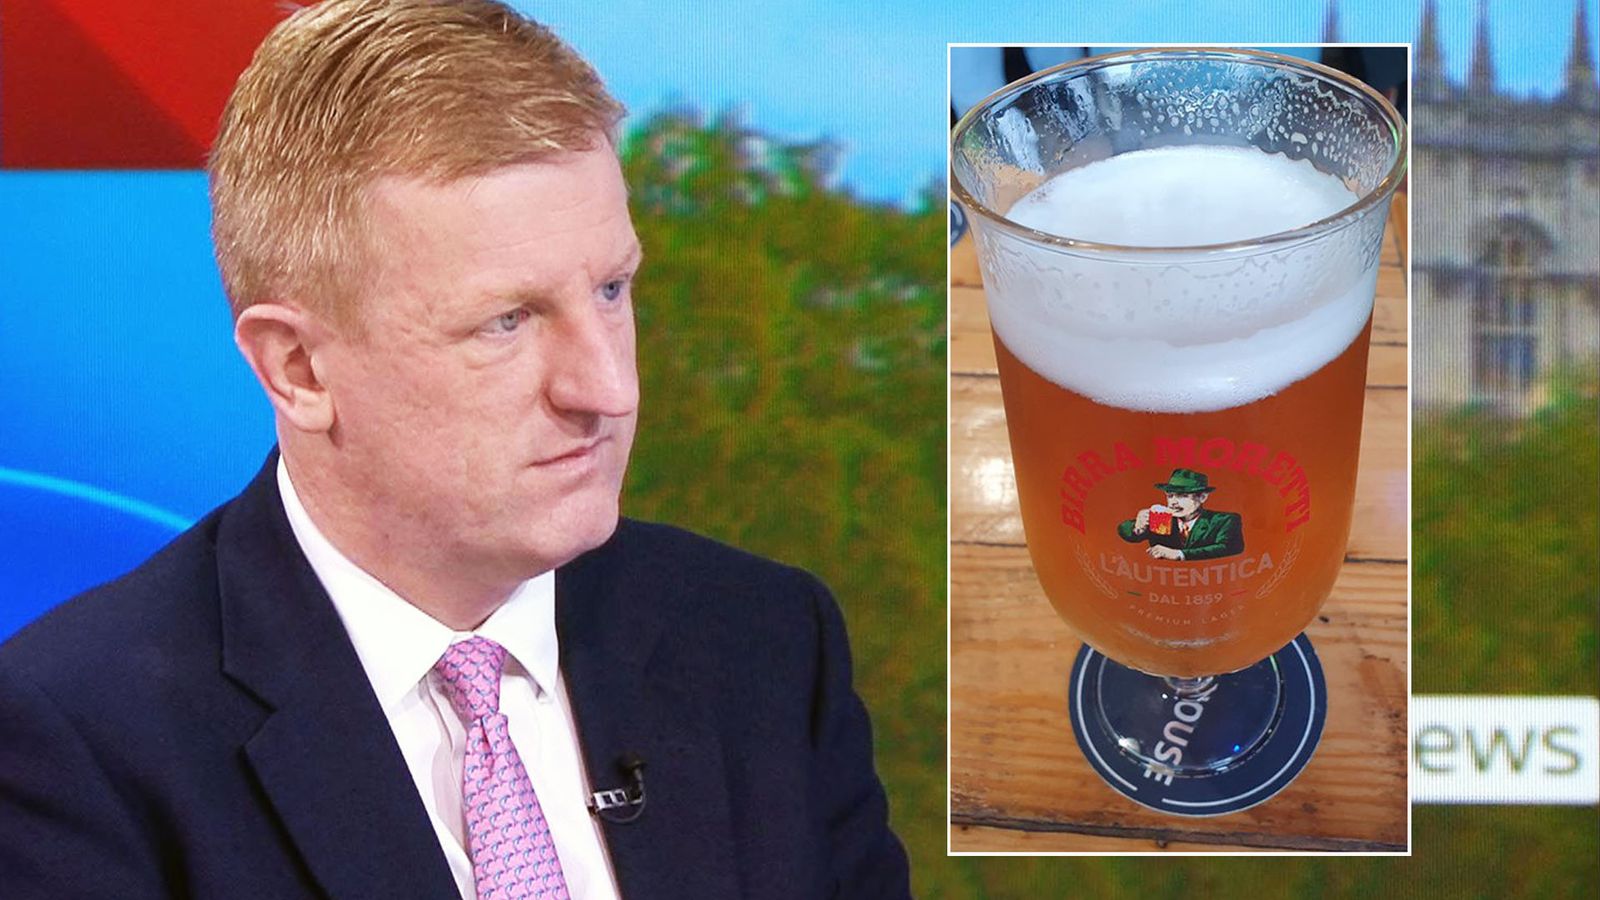 Crisis deepens as deputy PM refuses to say whether Lee Anderson is 'racist' - as under fire MP tweets 'Dog House' beer photos